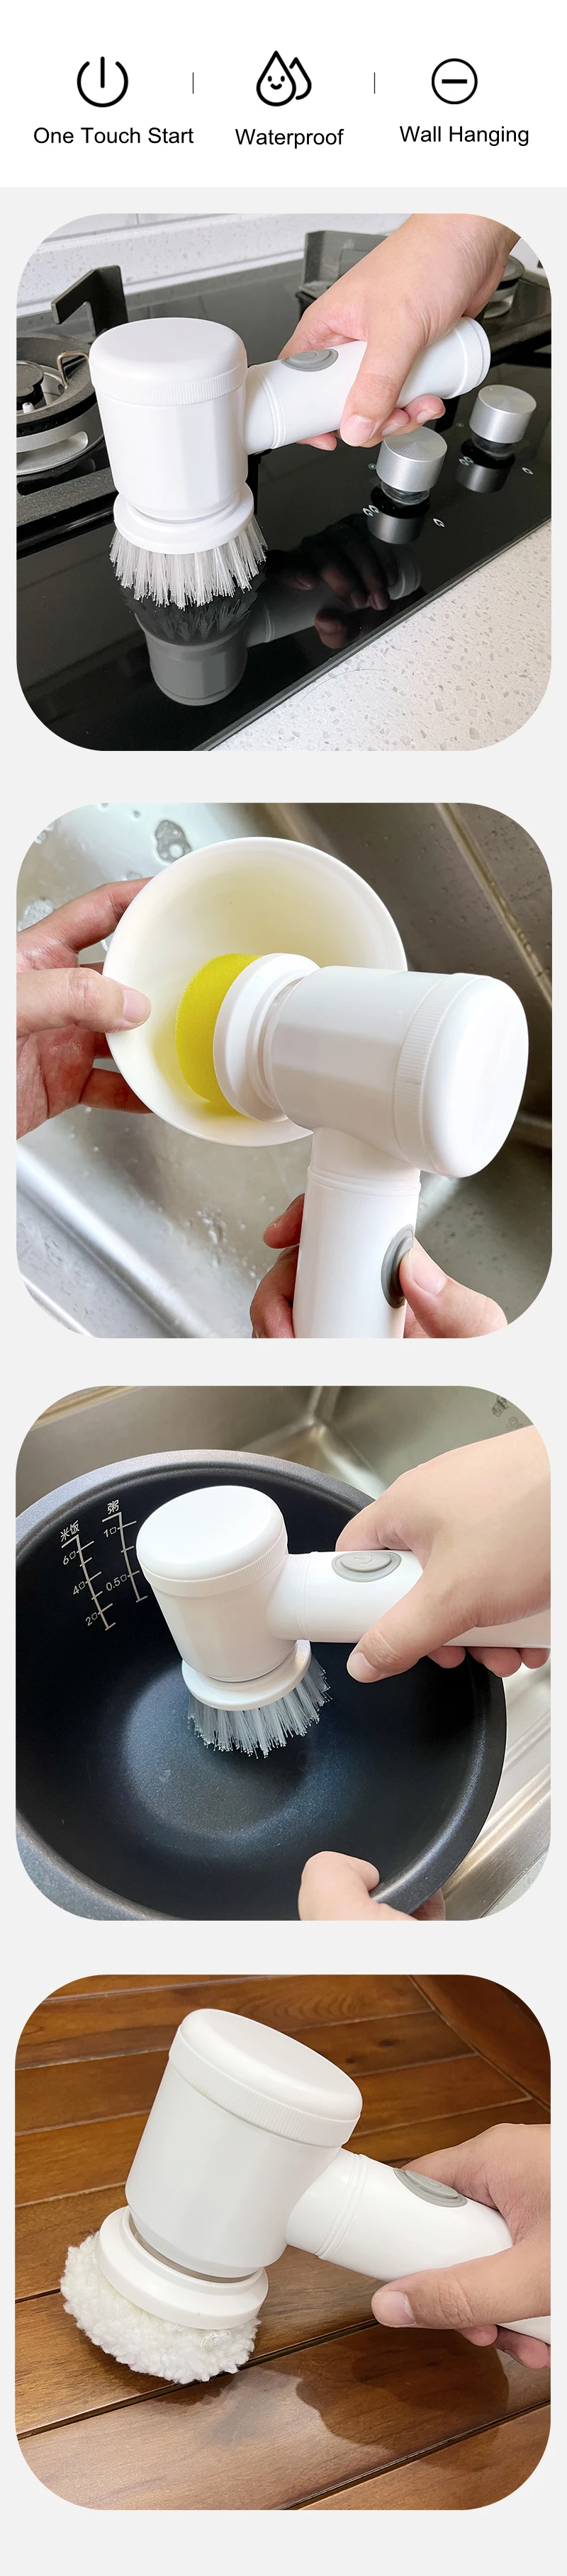 Wireless electric home, kitchen, bathtub cleaning brush